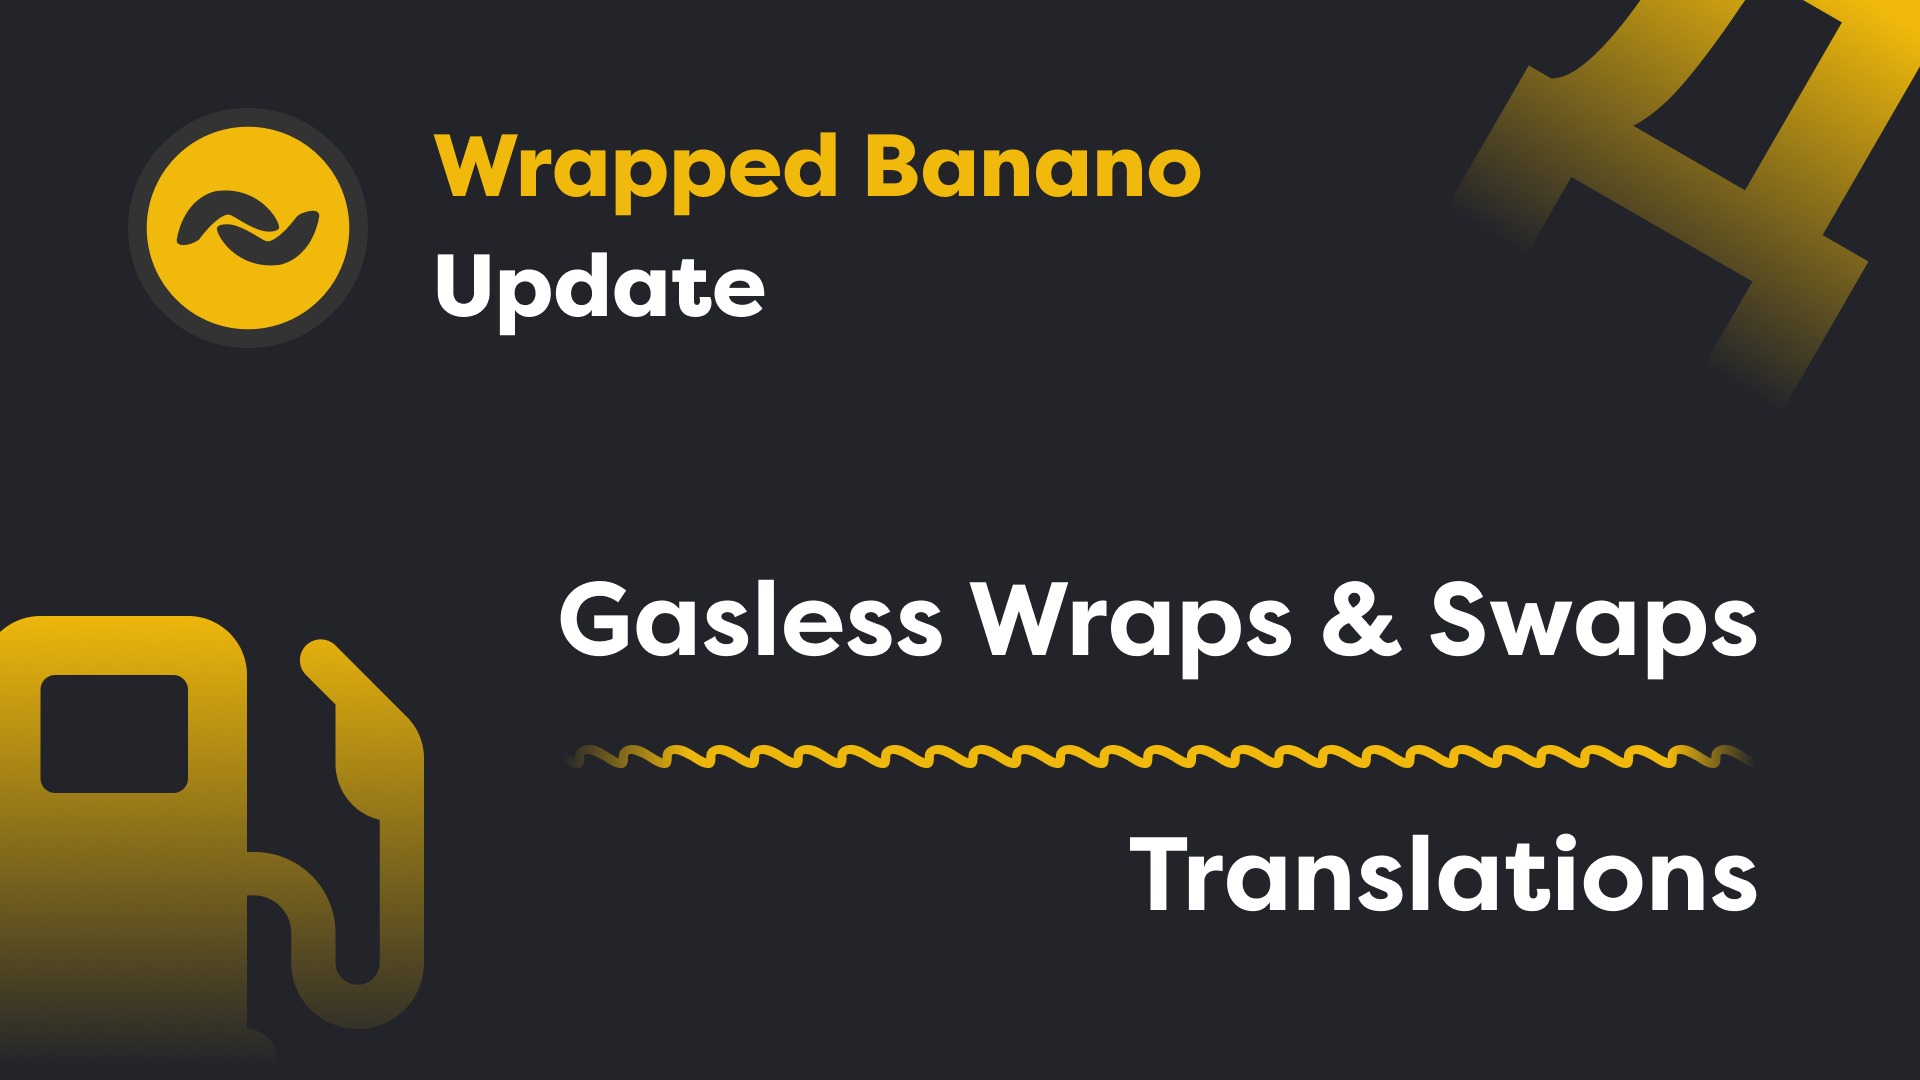 Wrapped Banano (wBAN) Update: Gasless Wraps/Swaps & Translations